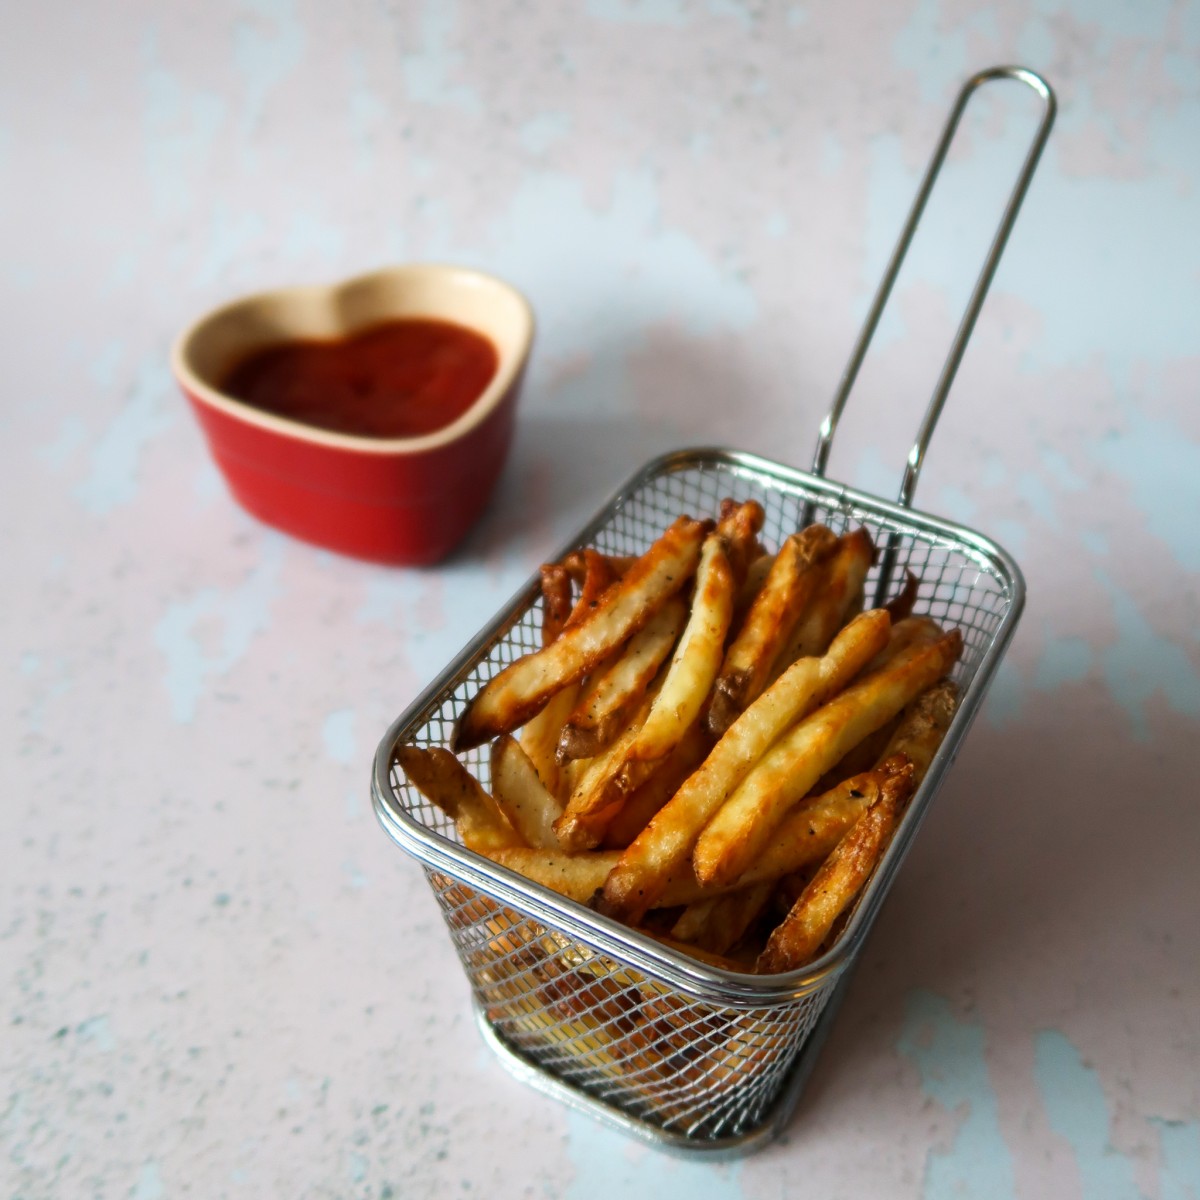 Healthy Airfryer chips in a fries basket with a heart shaped ramekin of tomato ketchup